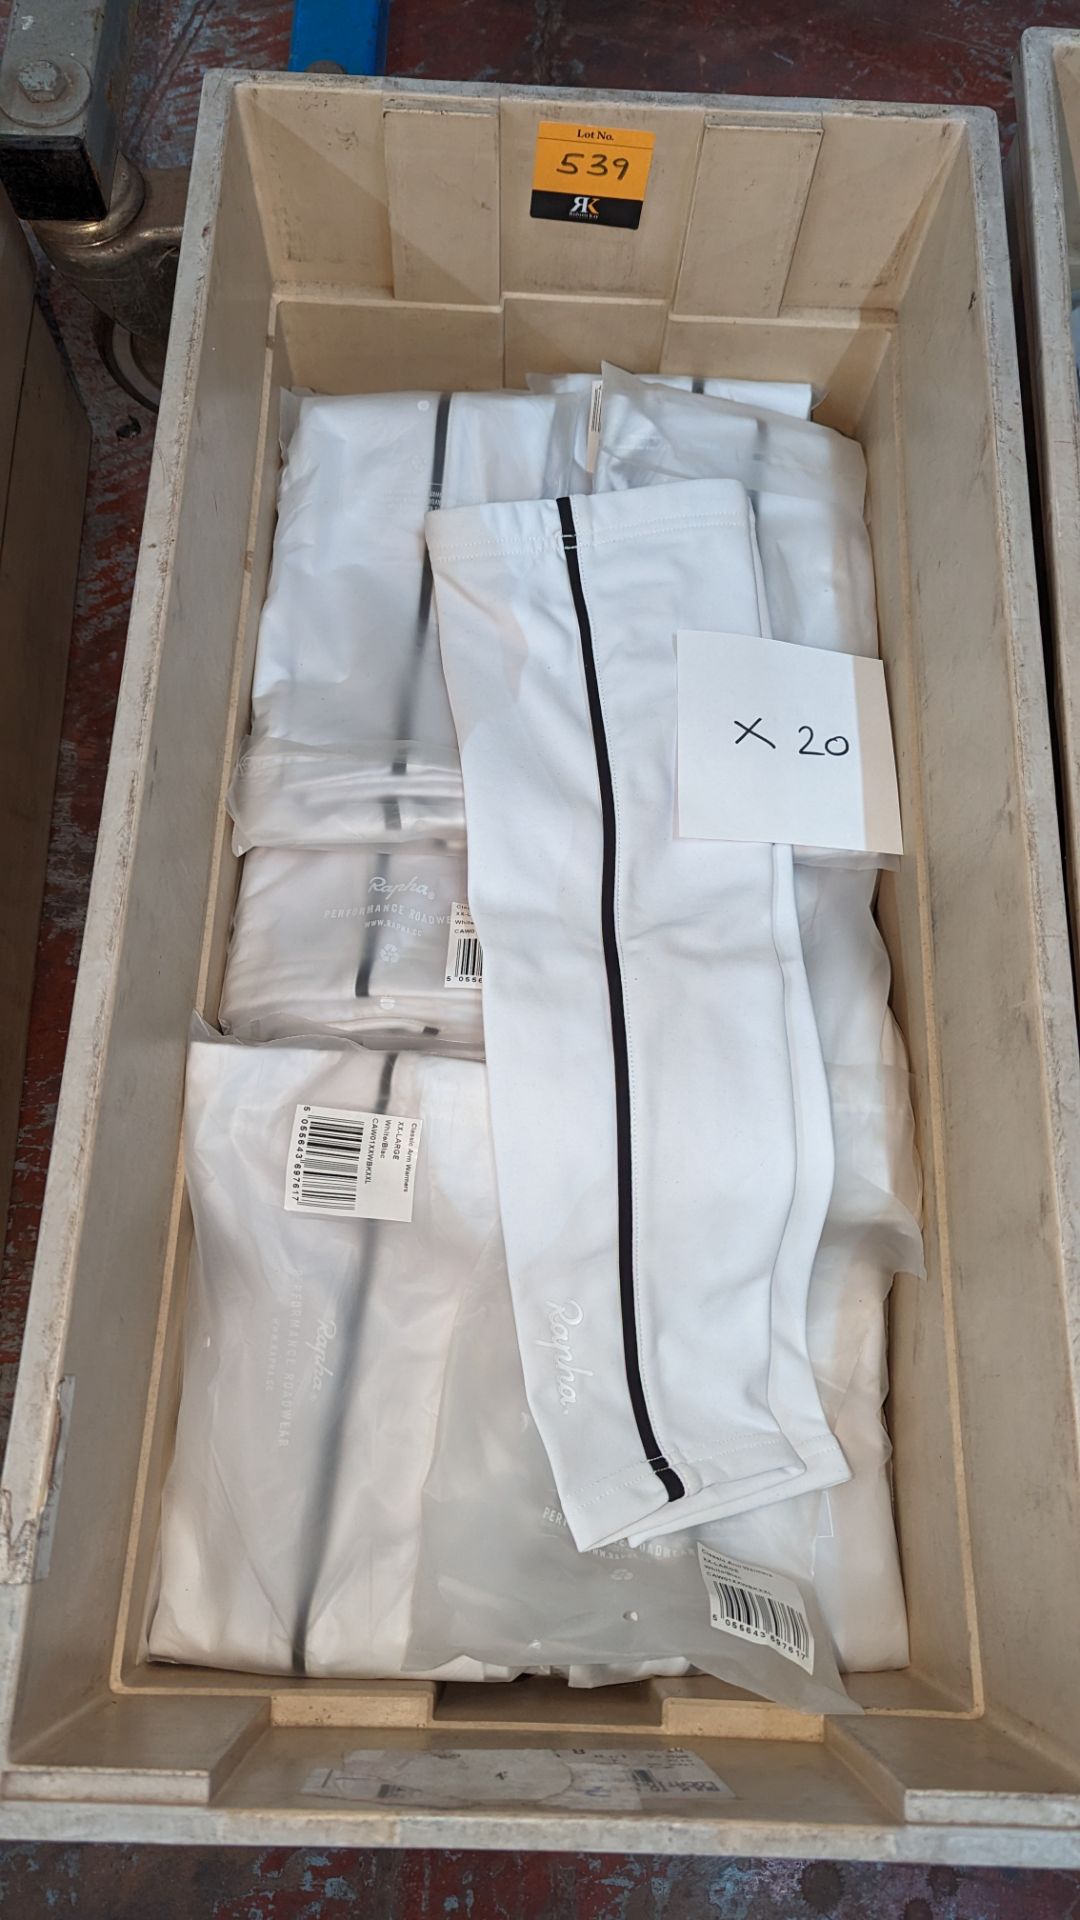 20 pairs of Rapha Cycling ladies arm warmers, in white with black detailing. These mostly appear to